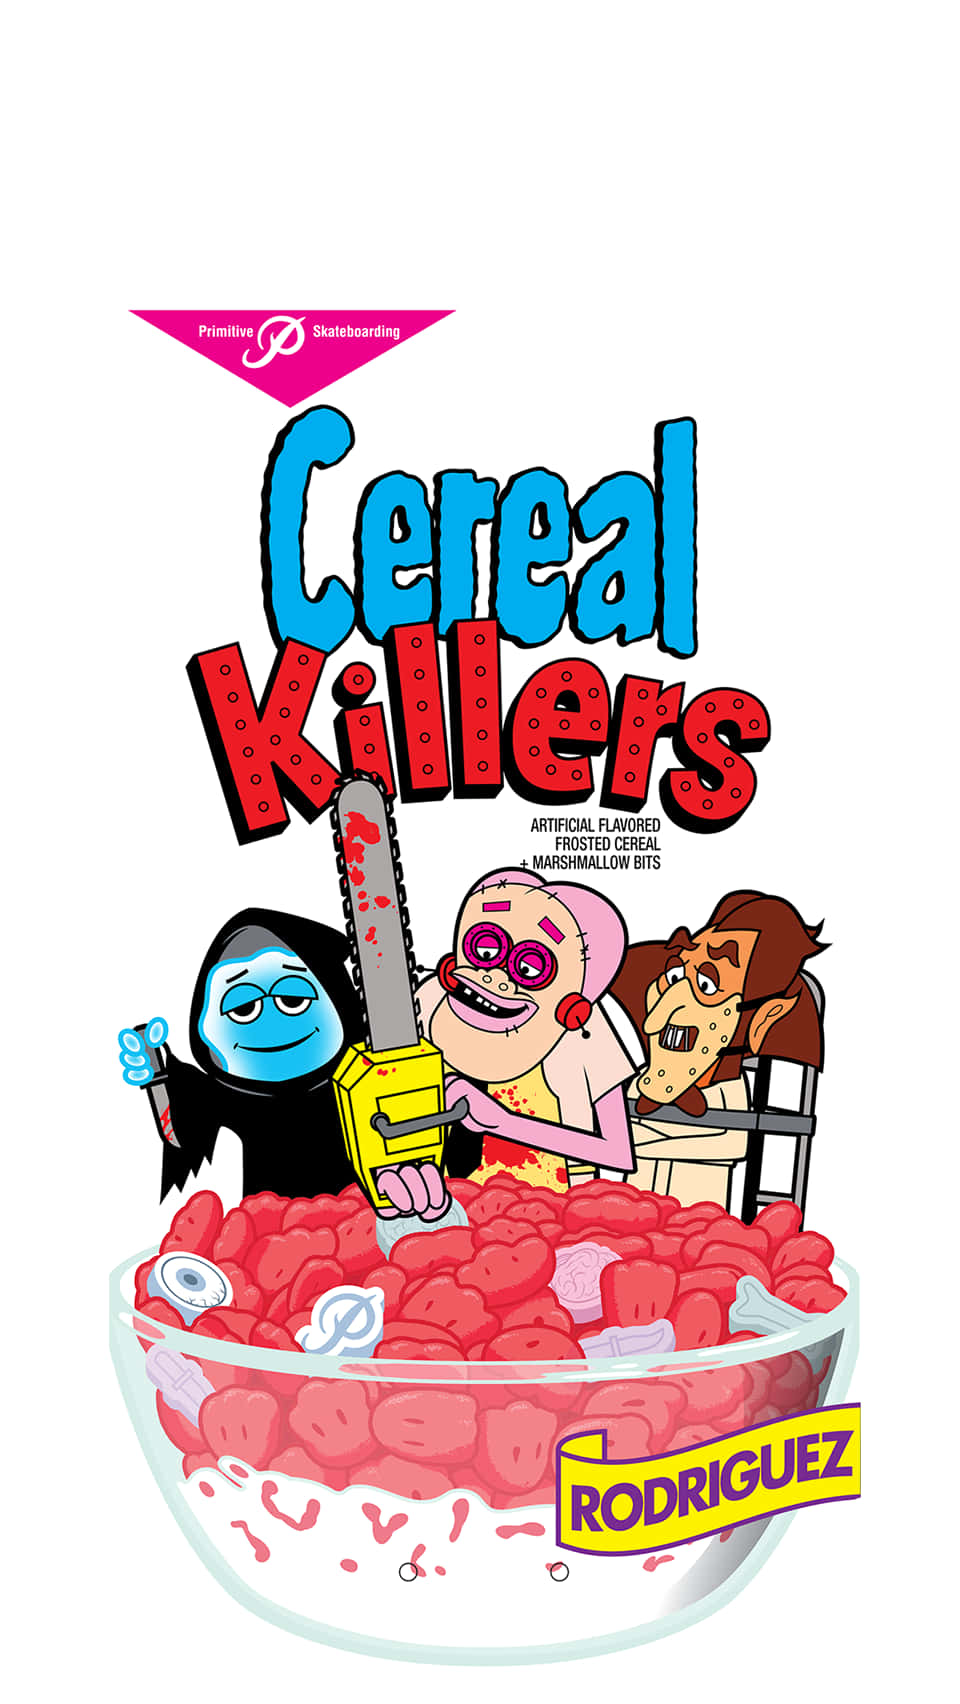 Asesinosde Cereales Asesinos De Cereales Asesinos De Cereales Asesinos De Cereales Asesinos De Cereales Asesinos De Cereales Asesinos De Cereales Asesinos De Cereales Asesinos De Cereales Asesinos De Cereales Asesino En Serie Fondo de pantalla